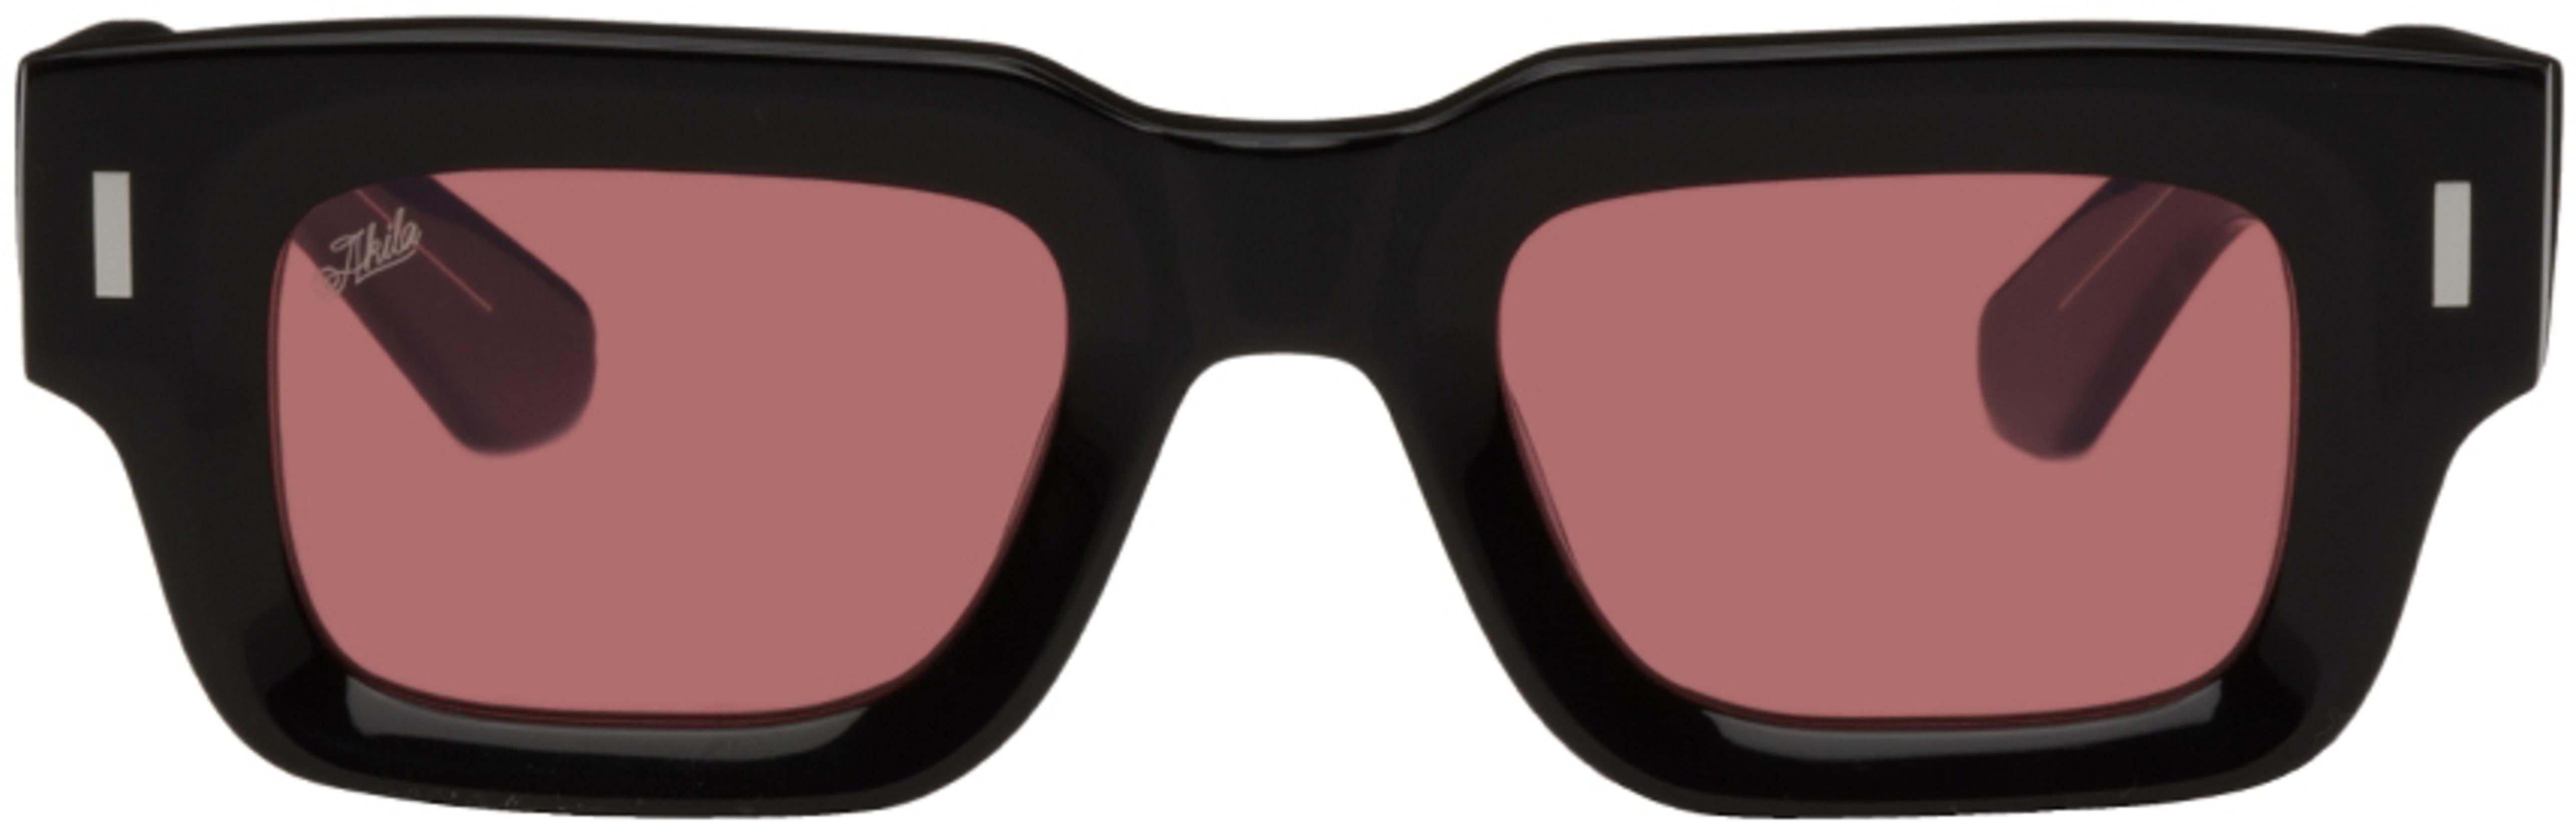 Black Ares Sunglasses by AKILA